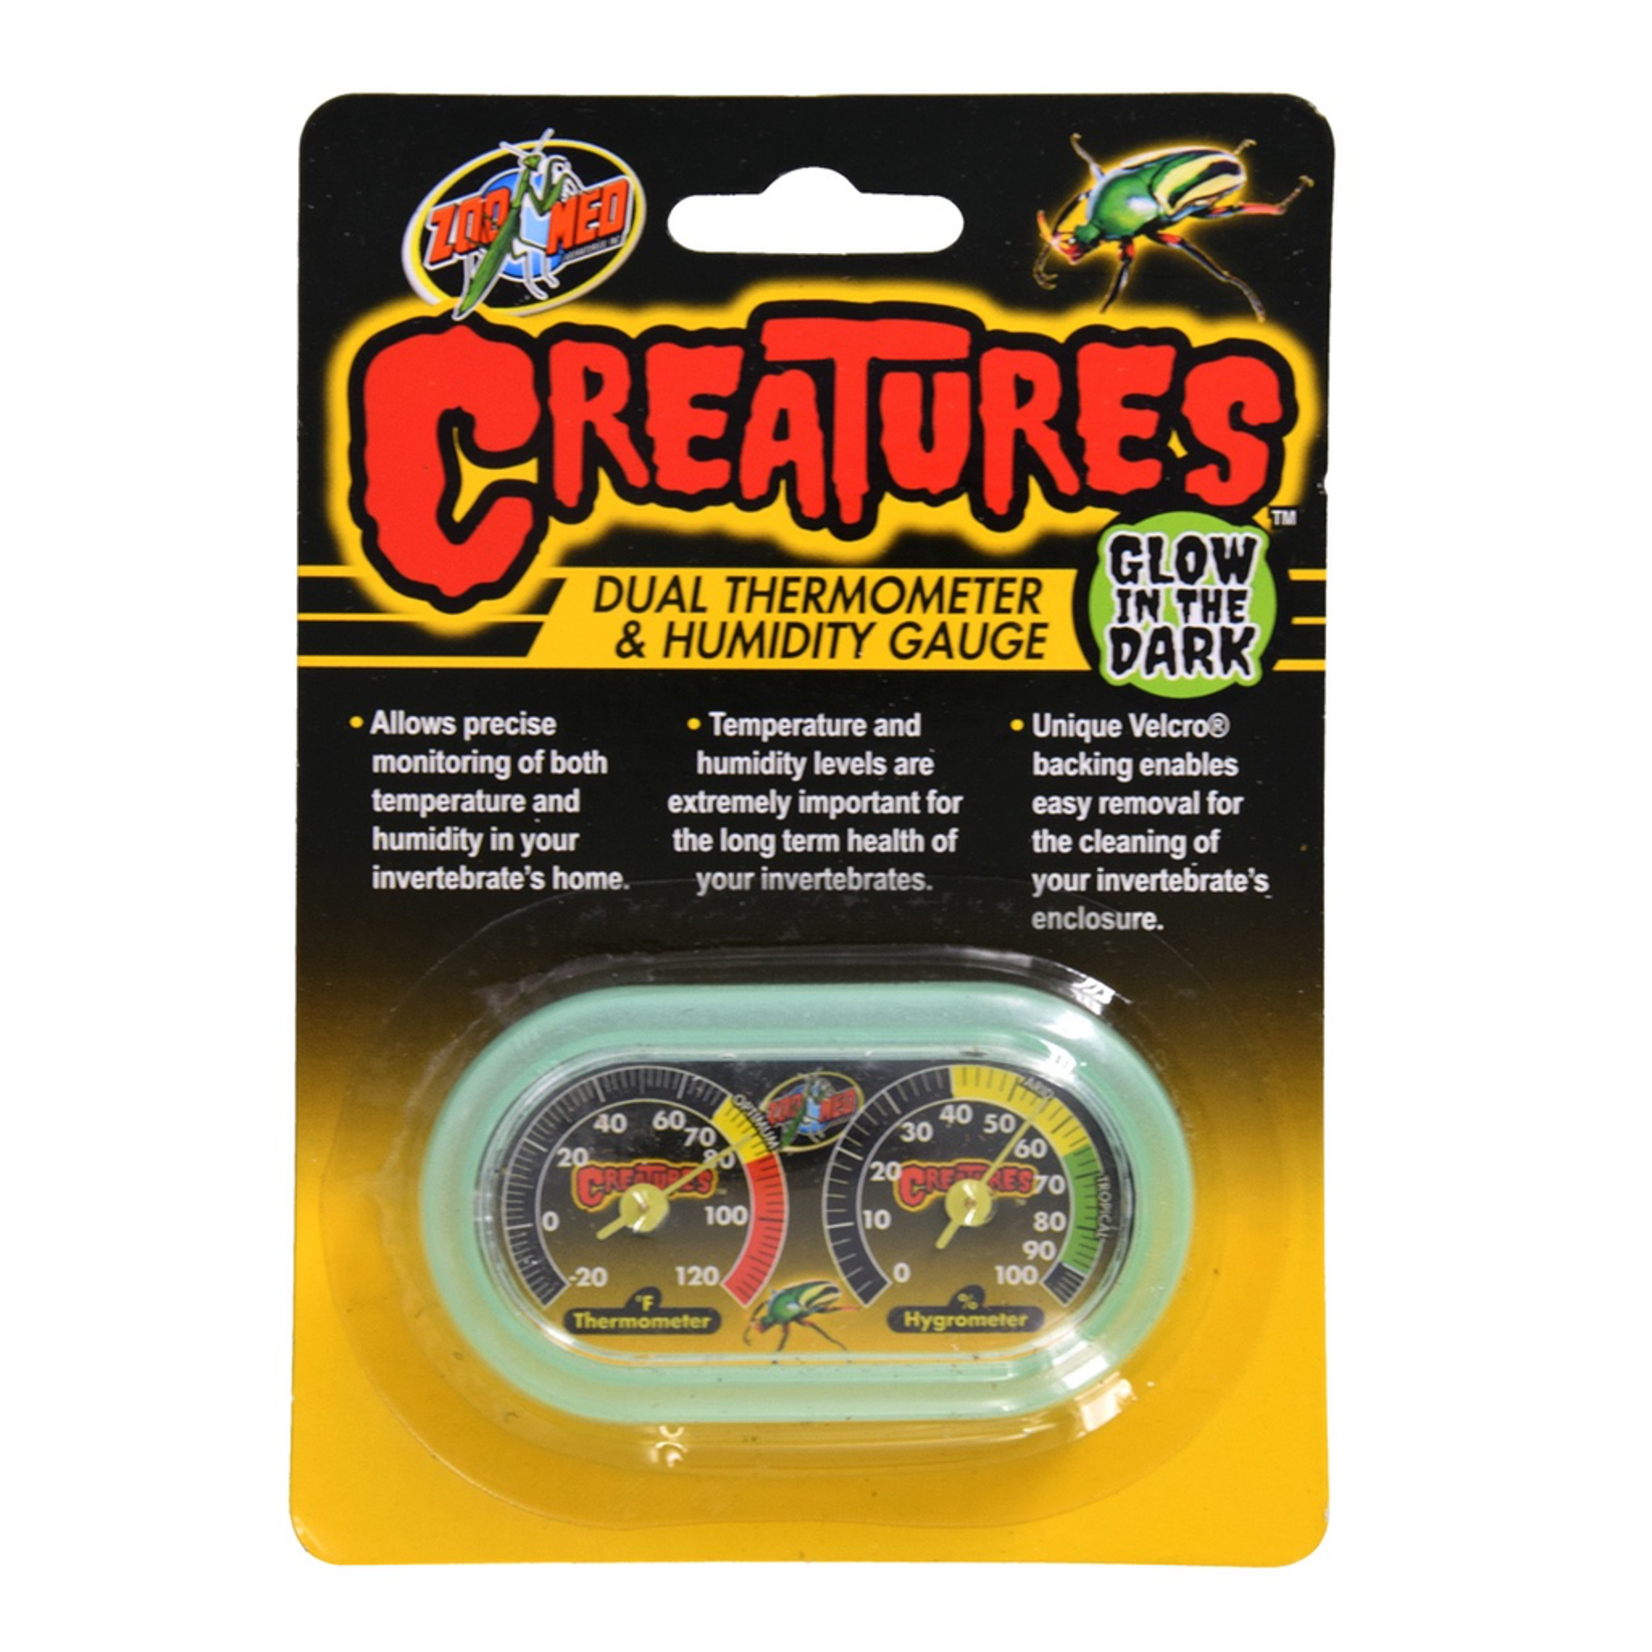 (W) Zoo Med Creatures Dual Thermometer & Humidity Gauge